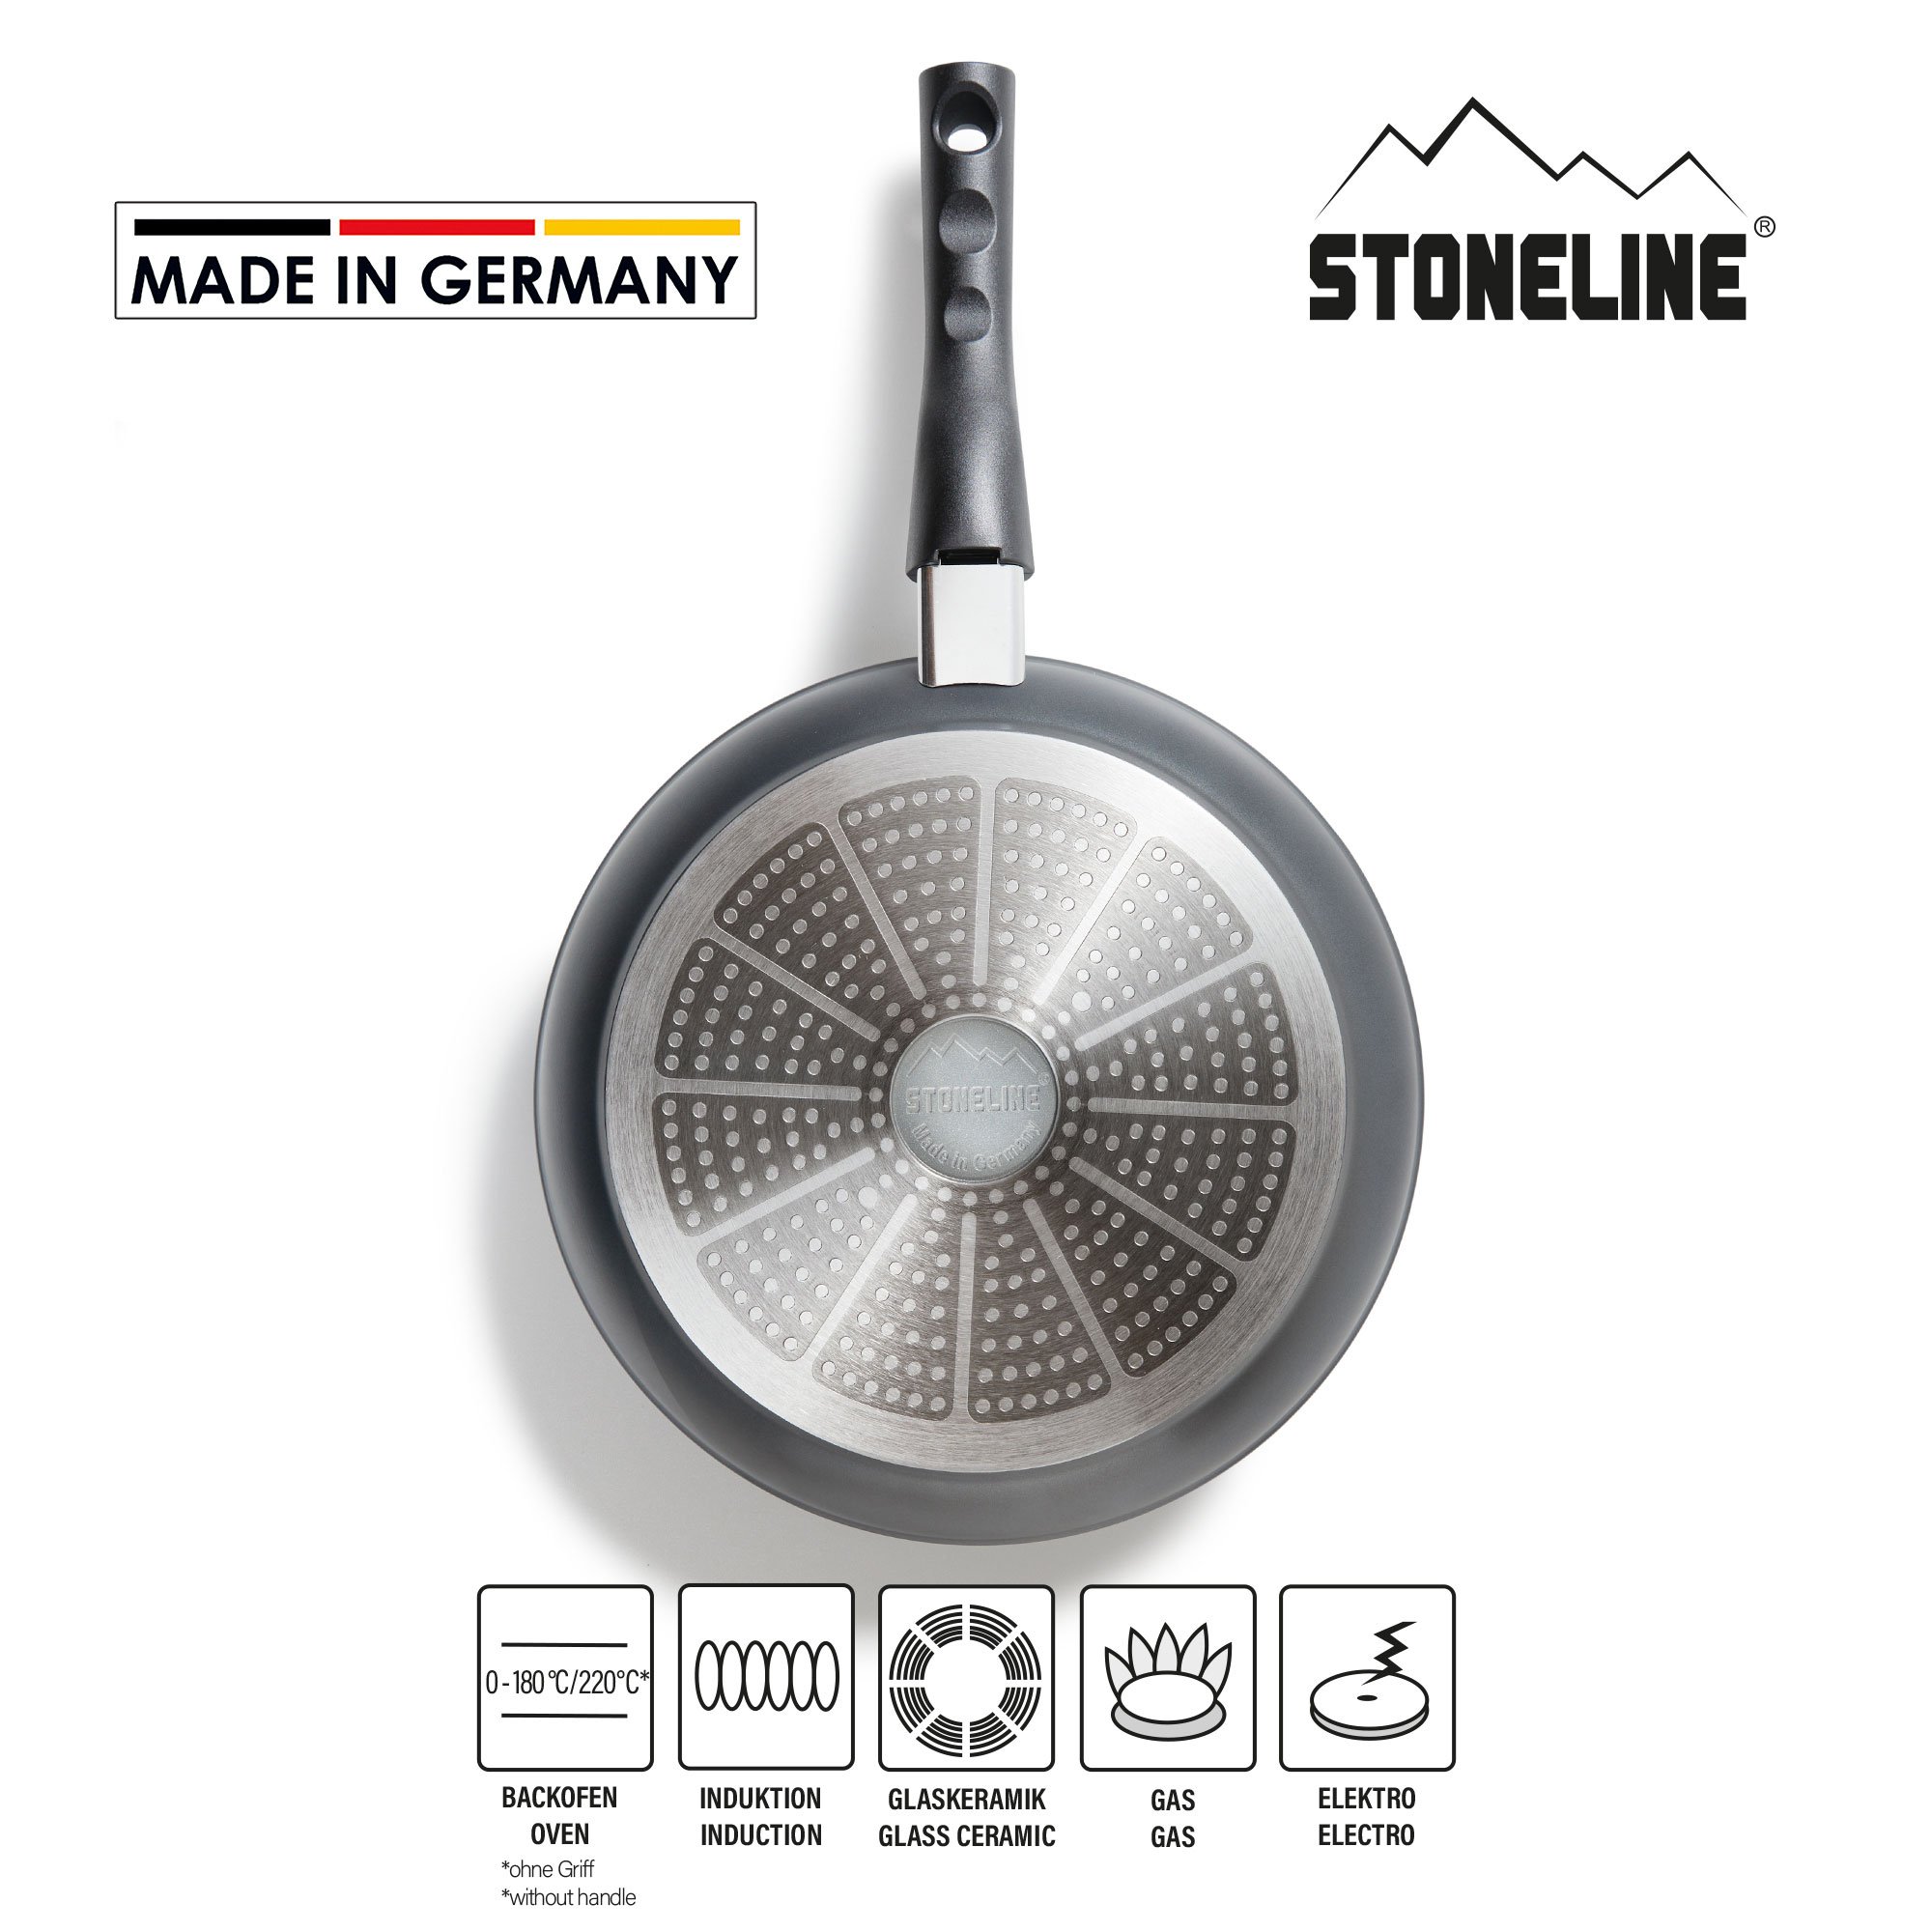 STONELINE® Deep Frying Pan 28 cm, Removable Handle, Non-Stick | Made in Germany | FLEX